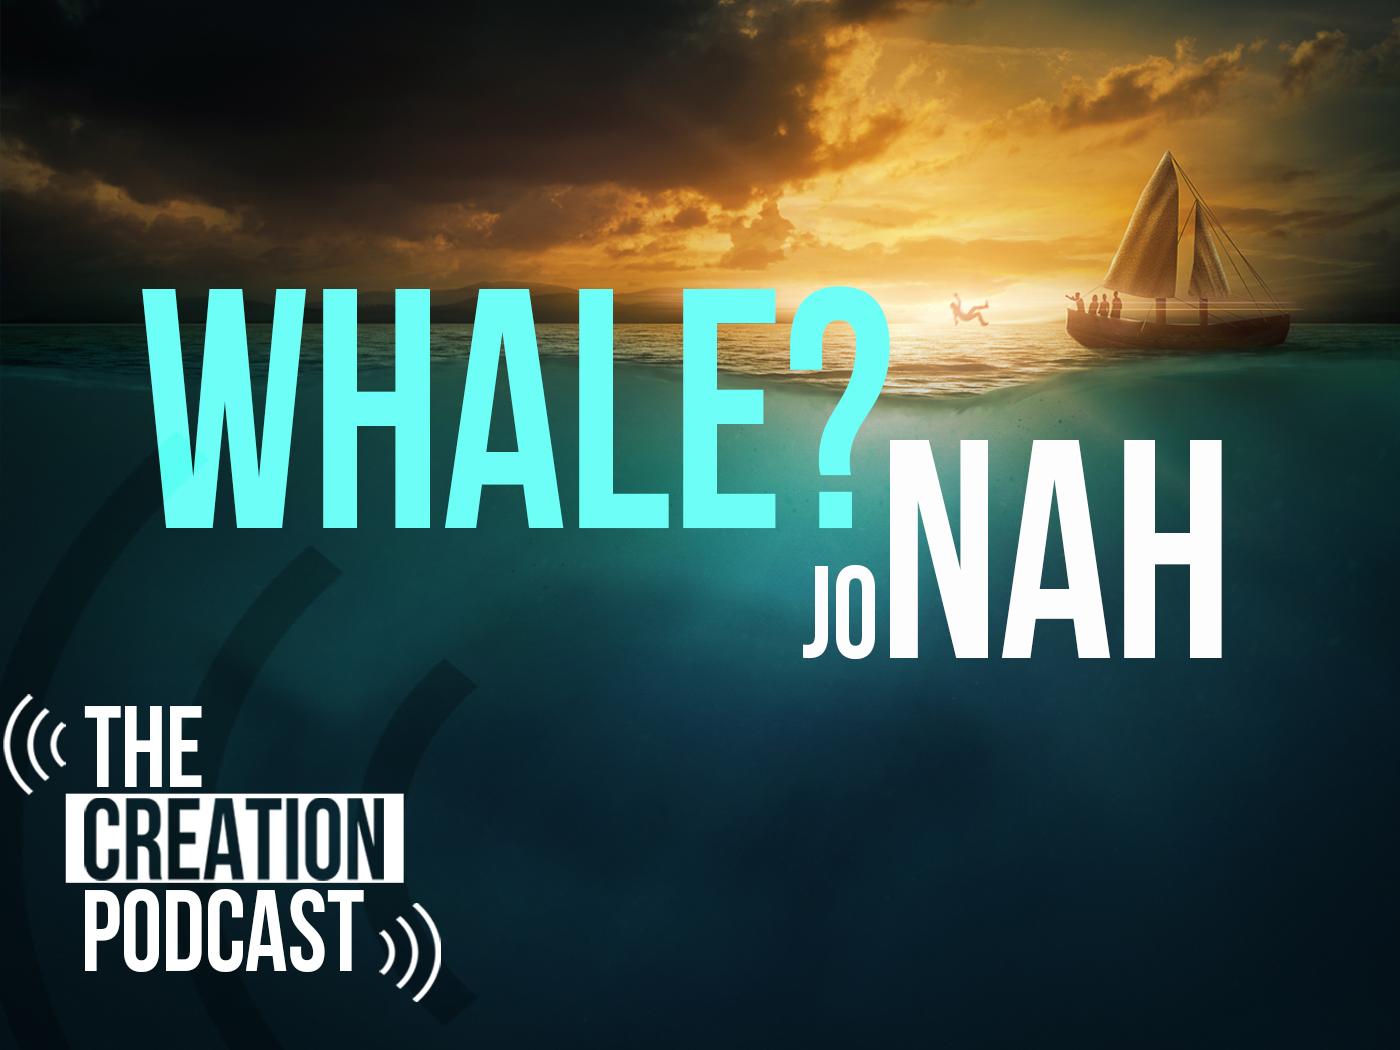 What Really Swallowed Jonah? | The Creation Podcast: Episode 57